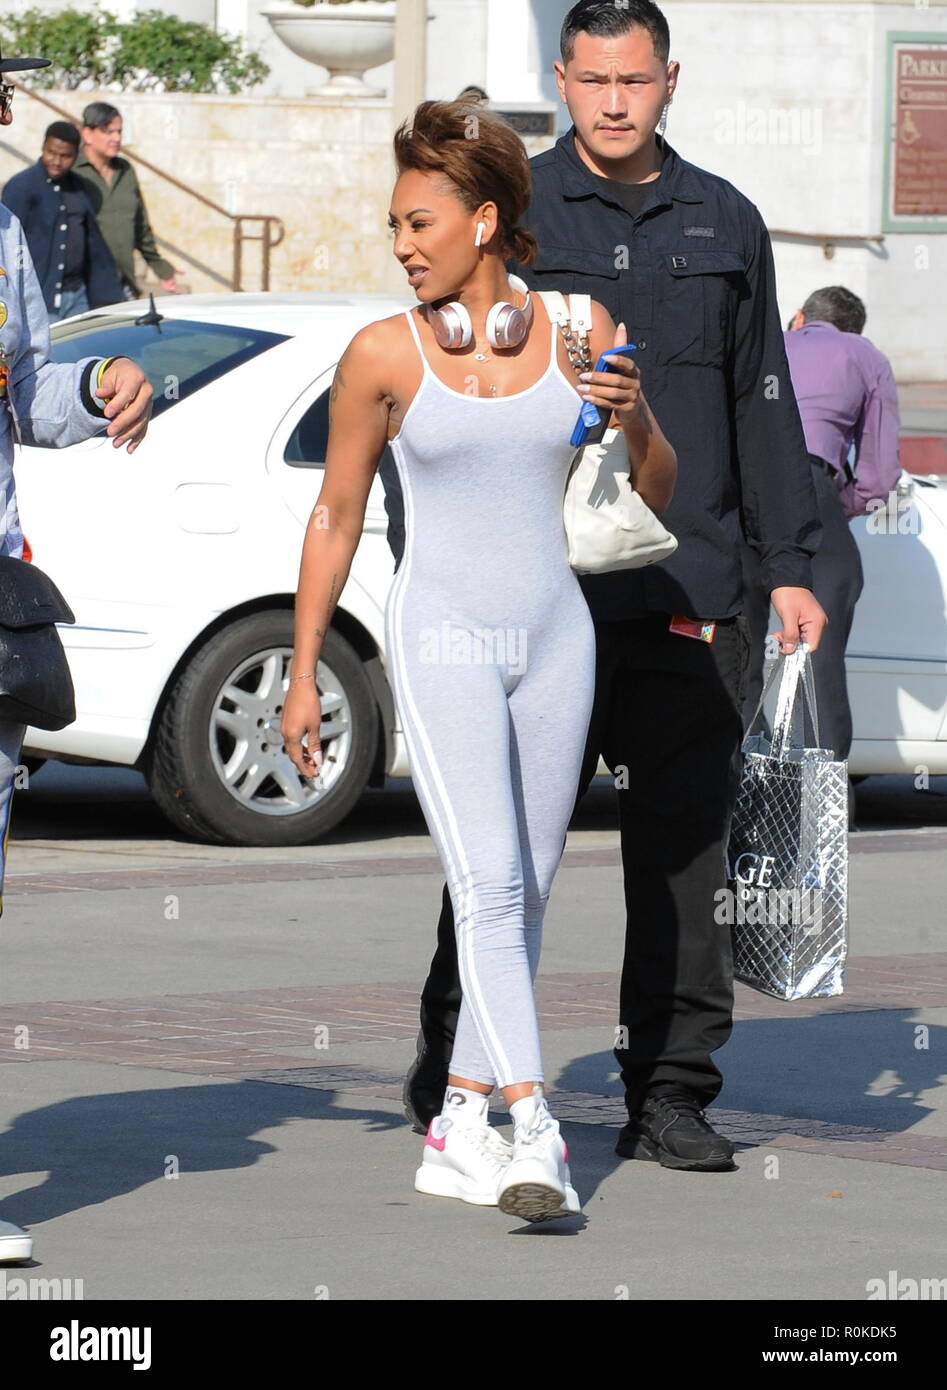 Mel B arrives at the 'Americas Got Talent' studios in a form fitting bodysuit  Featuring: Mel B Where: Pasadena, California, United States When: 05 Oct 2018 Credit: WENN Stock Photo